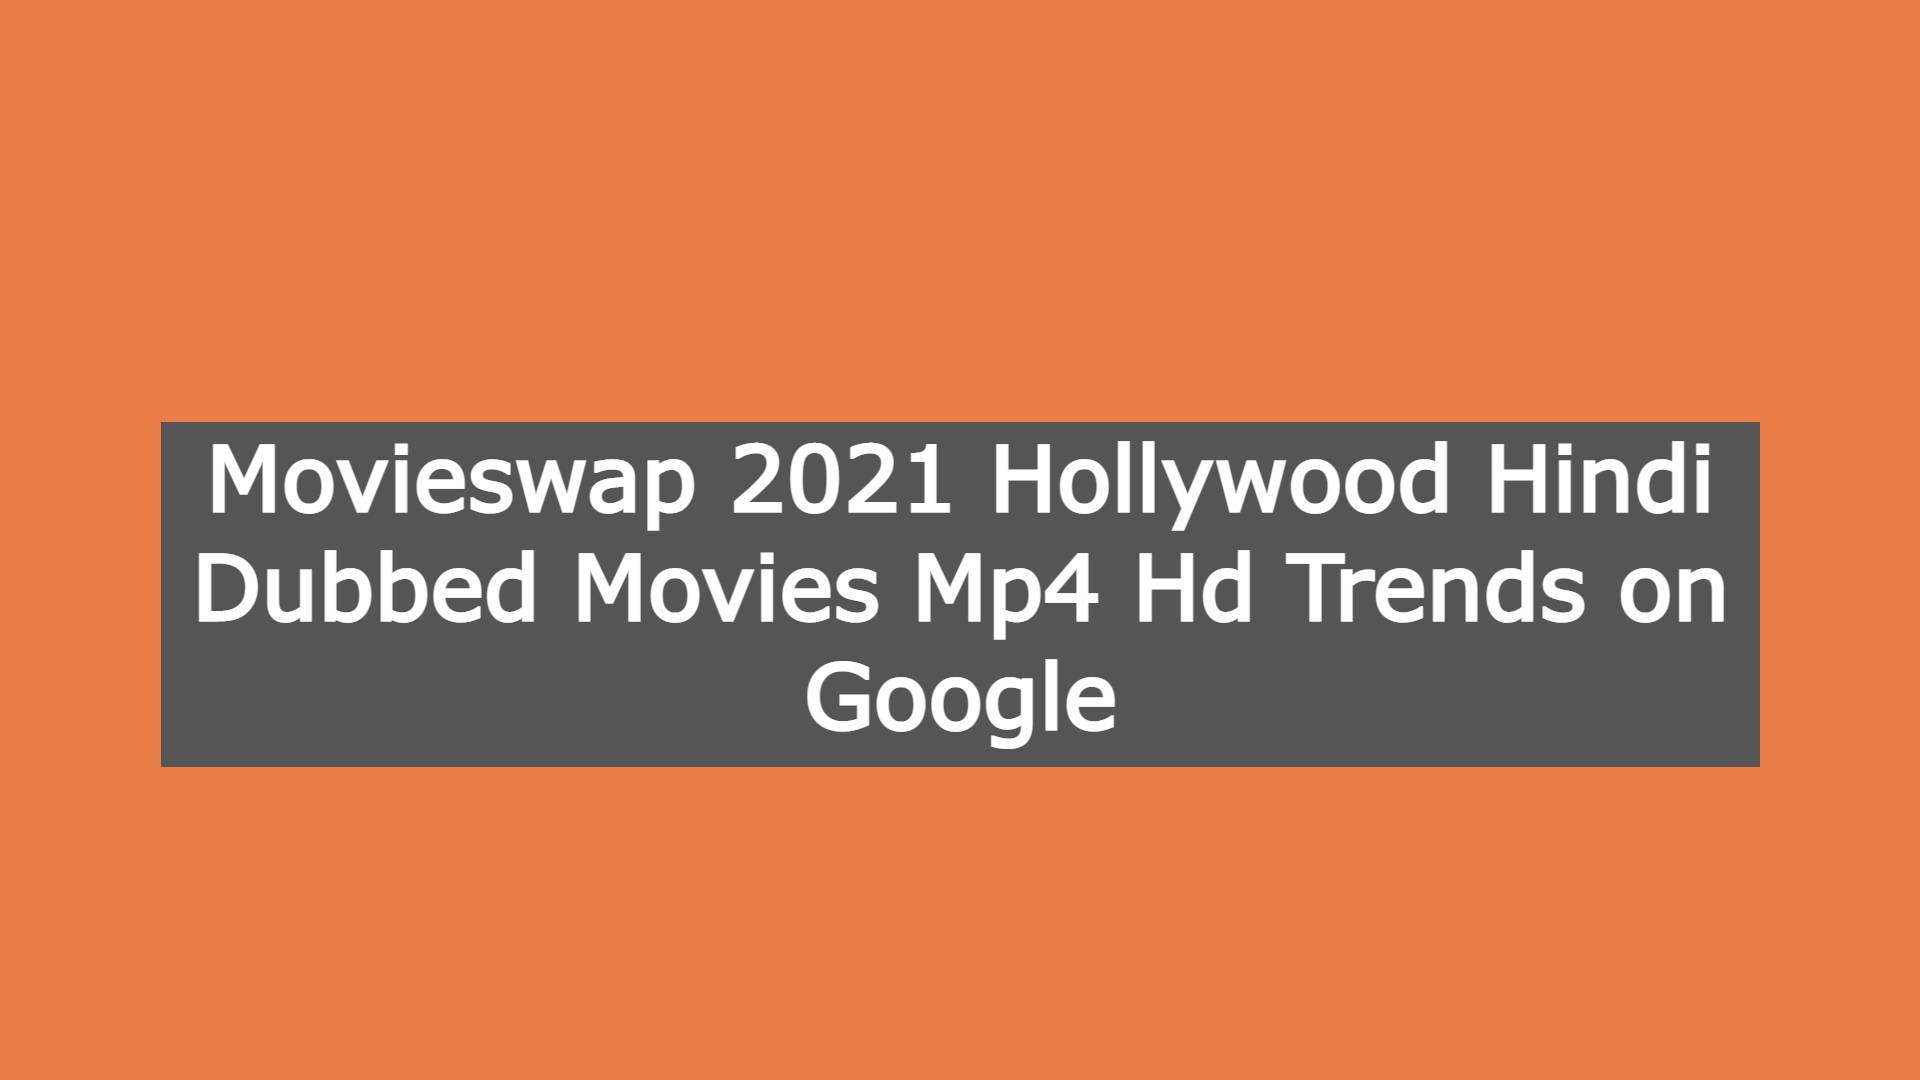 Movieswap 2021 Hollywood Hindi Dubbed Movies Mp4 Hd Trends on Google